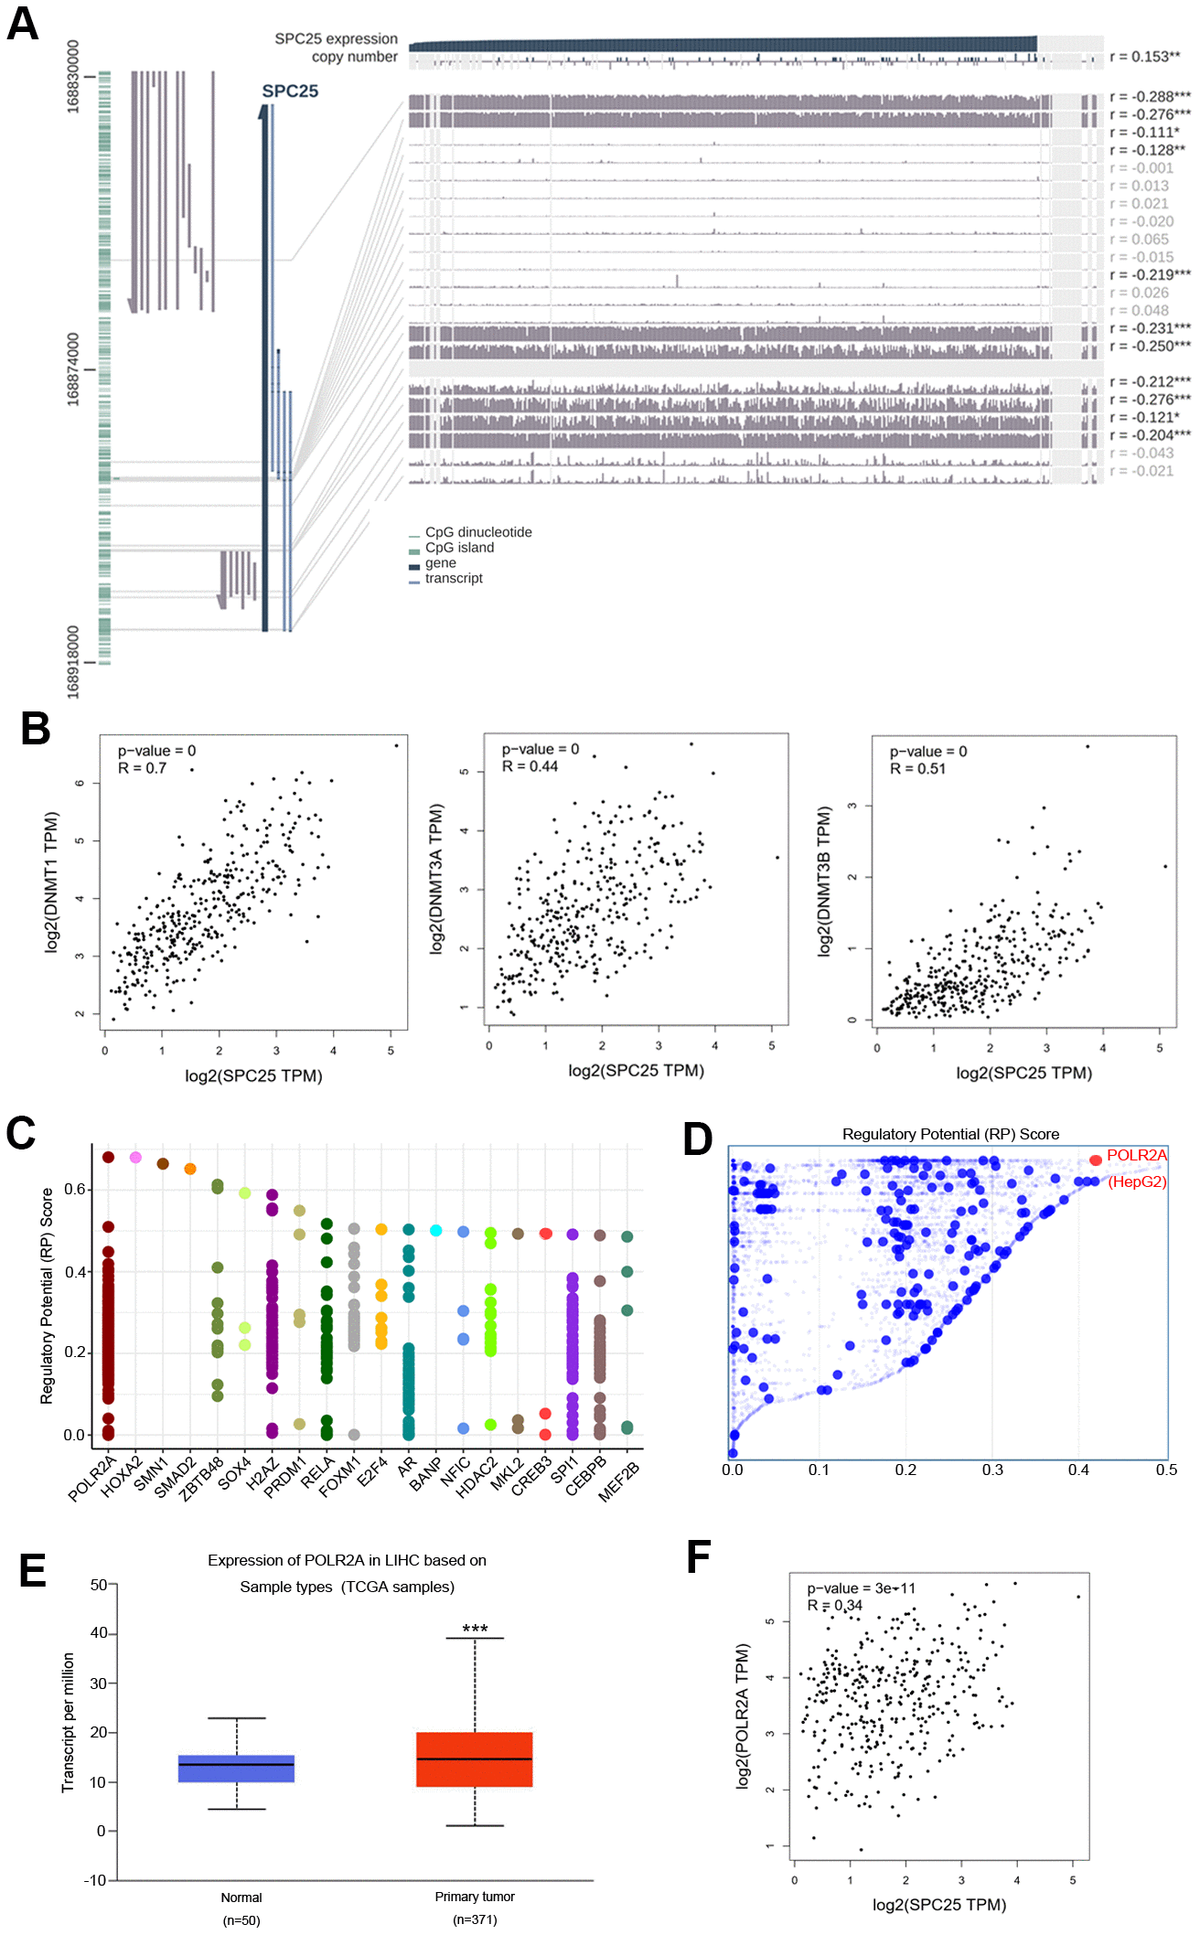 DNA methylation modification and transcription factors associated with SPC25 in HCC. (A) SPC25 DNA methylation modification in HCC. (B) Correlation between SPC25 mRNA expression and DNA methyltransferase (DNMT) expression. (C) Top 20 transcription factors (TFs) that potentially regulate SPC25 in HCC. (D) TFs with high regulatory potential in HepG2 cell lines (10k distance to transcription start site, TSS). (E) POLR2A mRNA expression is significantly higher in HCC samples than in normal samples. (F) Correlation between SPC25 and POLR2A mRNA expression. (*P 